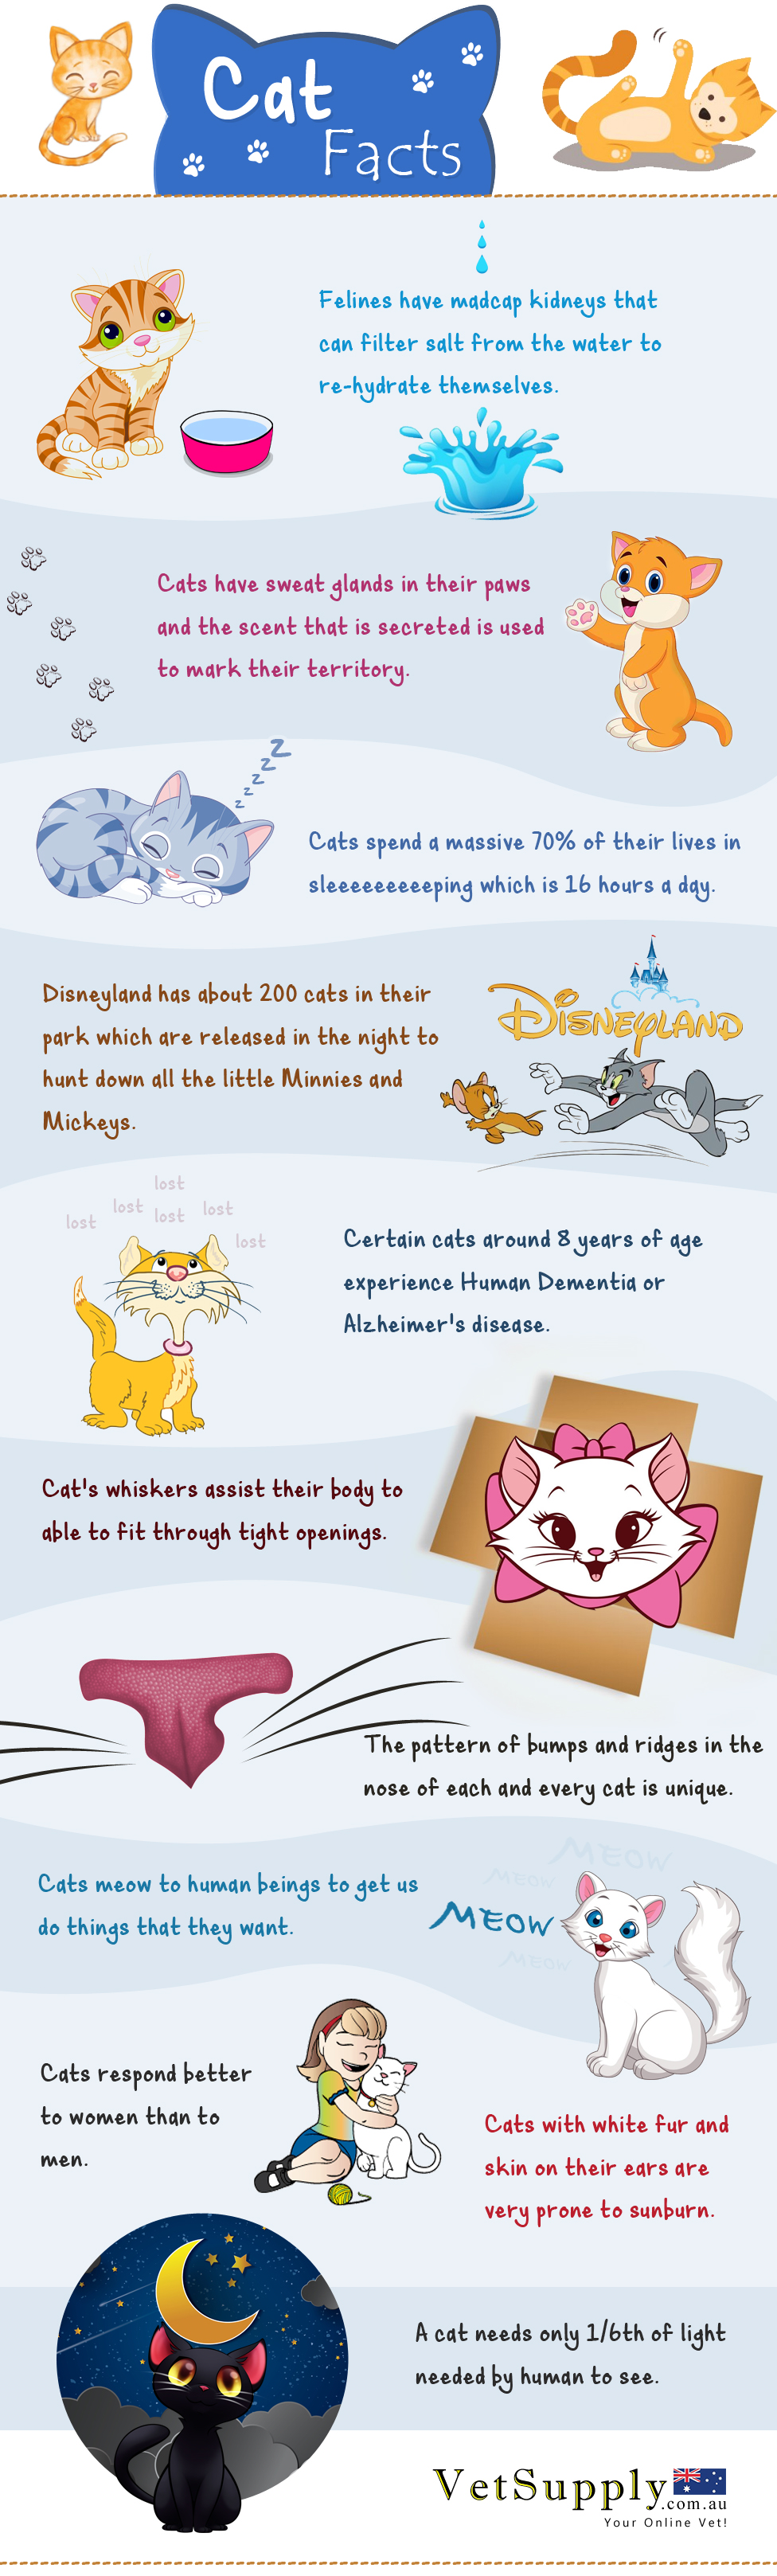 Some Bizarre Cat Facts that will Blow off your Mind